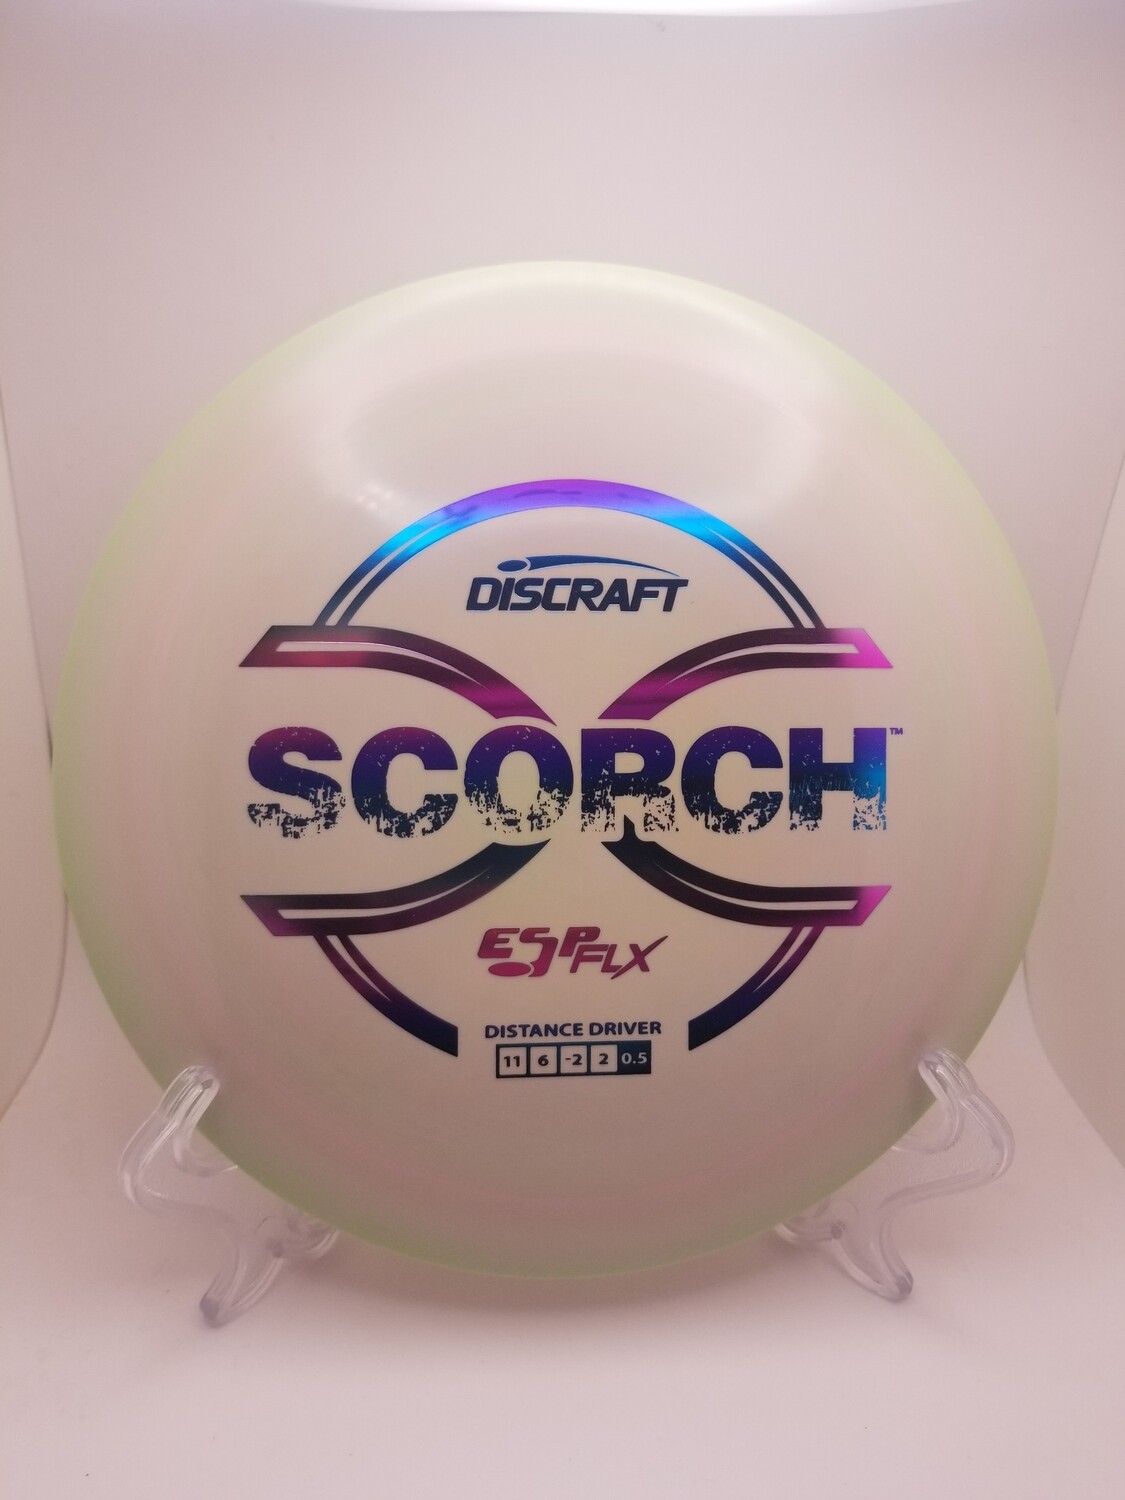 Discraft Discs ESP FLX Scorch Light Tan with Green Rim with Blueish Gradient Fade to Purple Stamp 170-172g